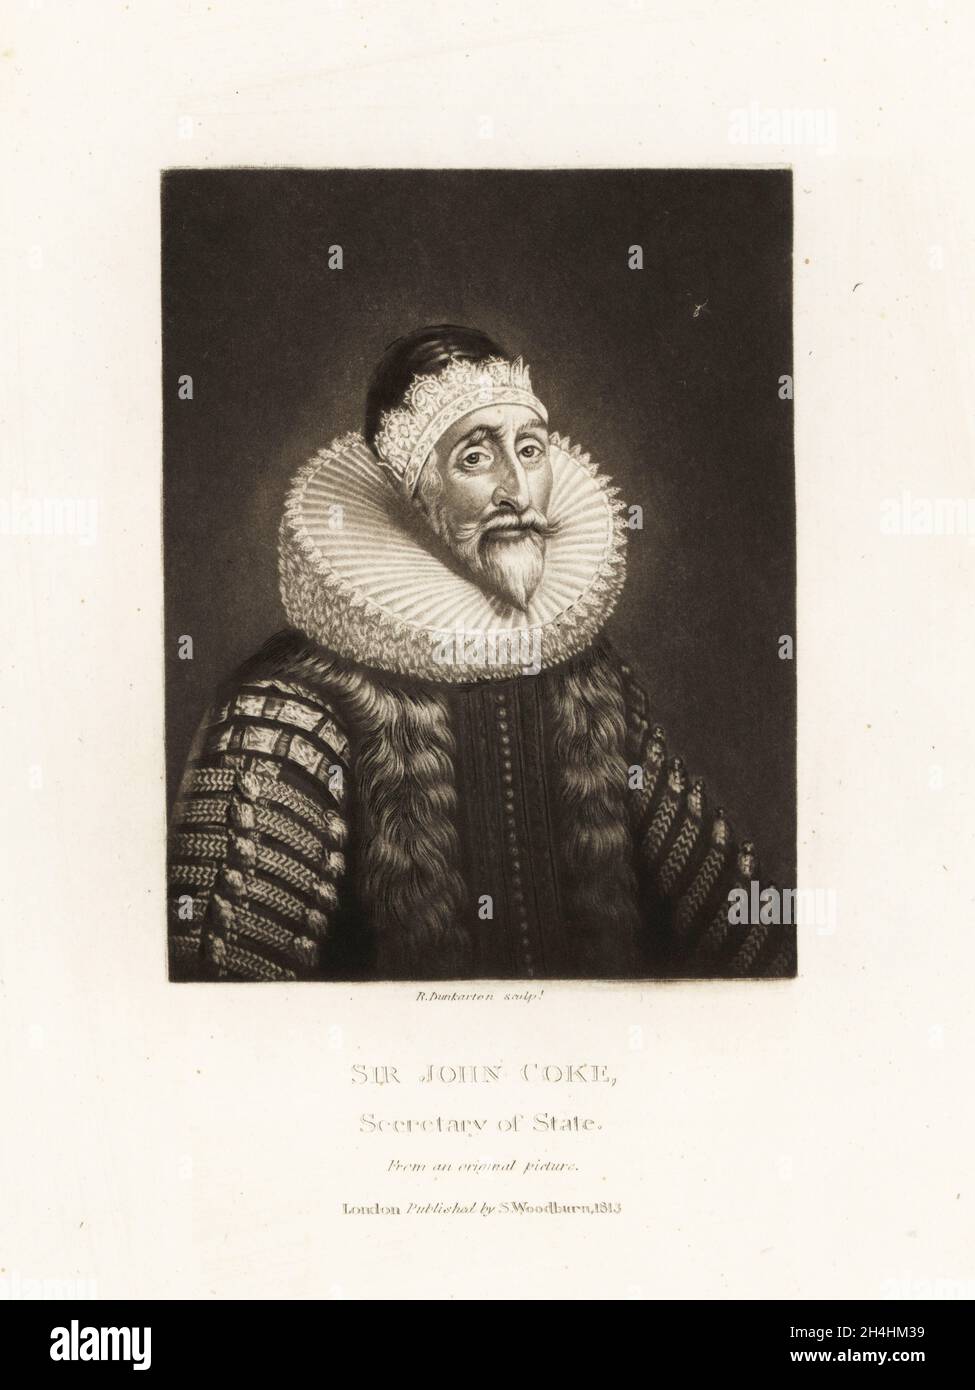 Sir John Coke, 1563-1644, English politician, MP, and Secretary of State to King Charles I. In lace ruff and cap. Mezzotint engraving by Robert Dunkarton after an original portrait from Richard Earlom and Charles Turner's Portraits of Characters Illustrious in British History Engraved in Mezzotinto, published by S. Woodburn, London, 1813. Stock Photo